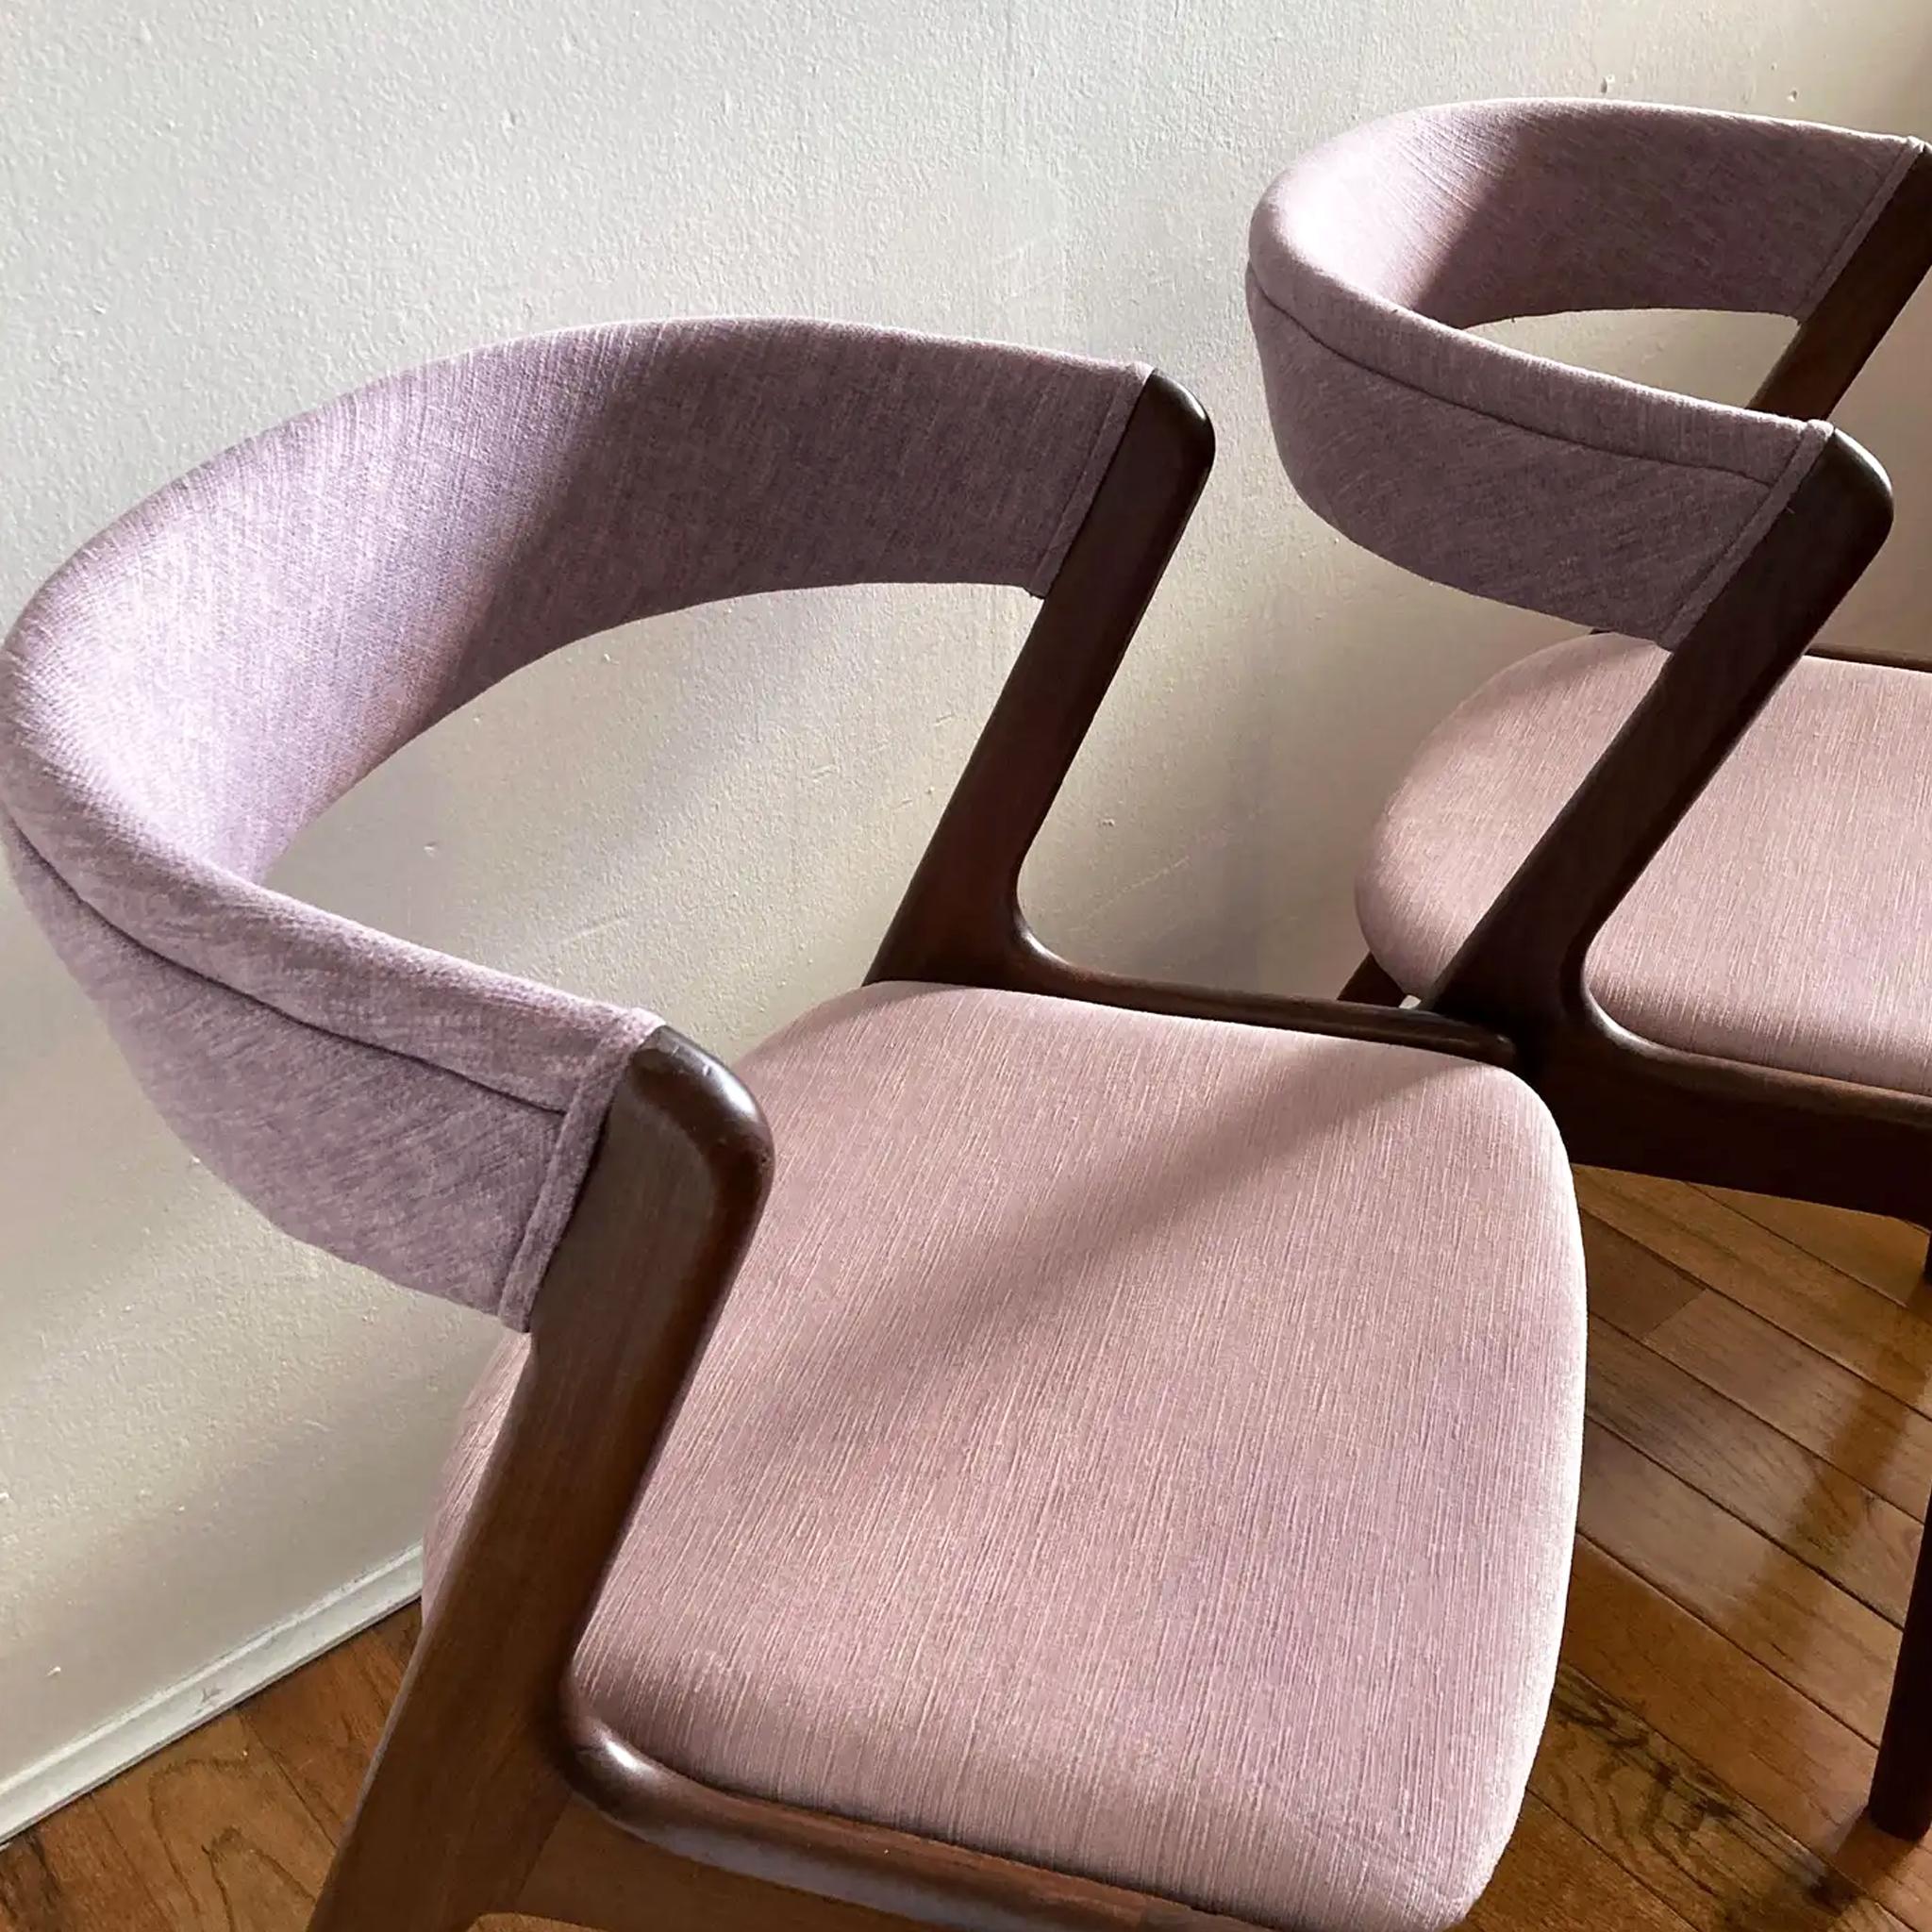 Kai Kristiansen Mauve Pink Curved Back Chair, 1960s For Sale 2